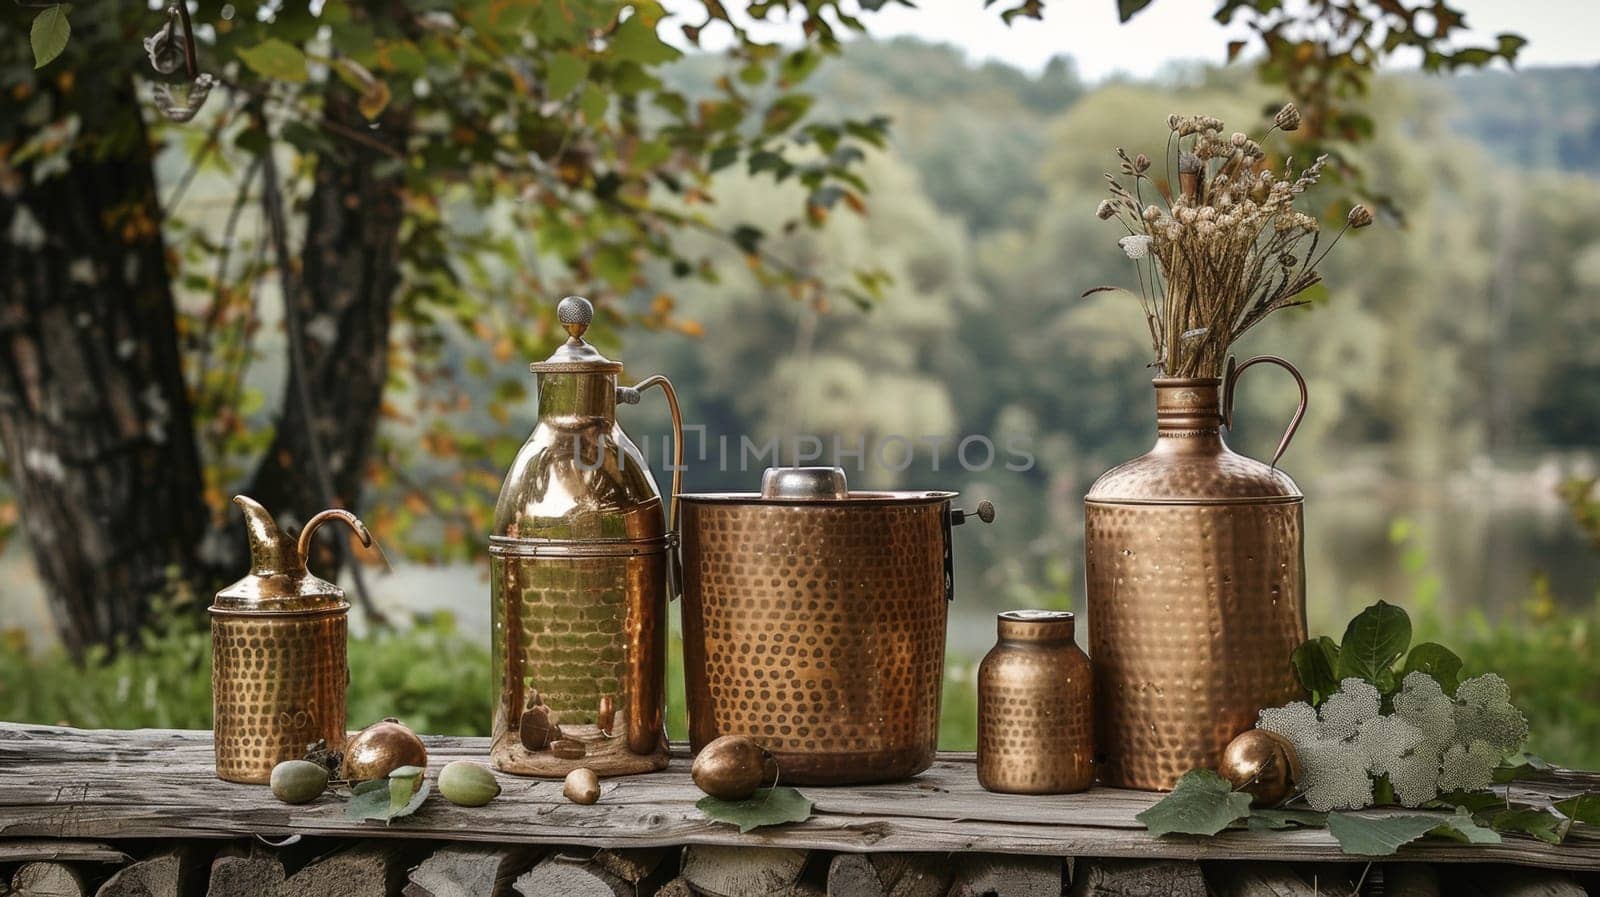 A group of copper vases and bottles on a wooden table, AI by starush